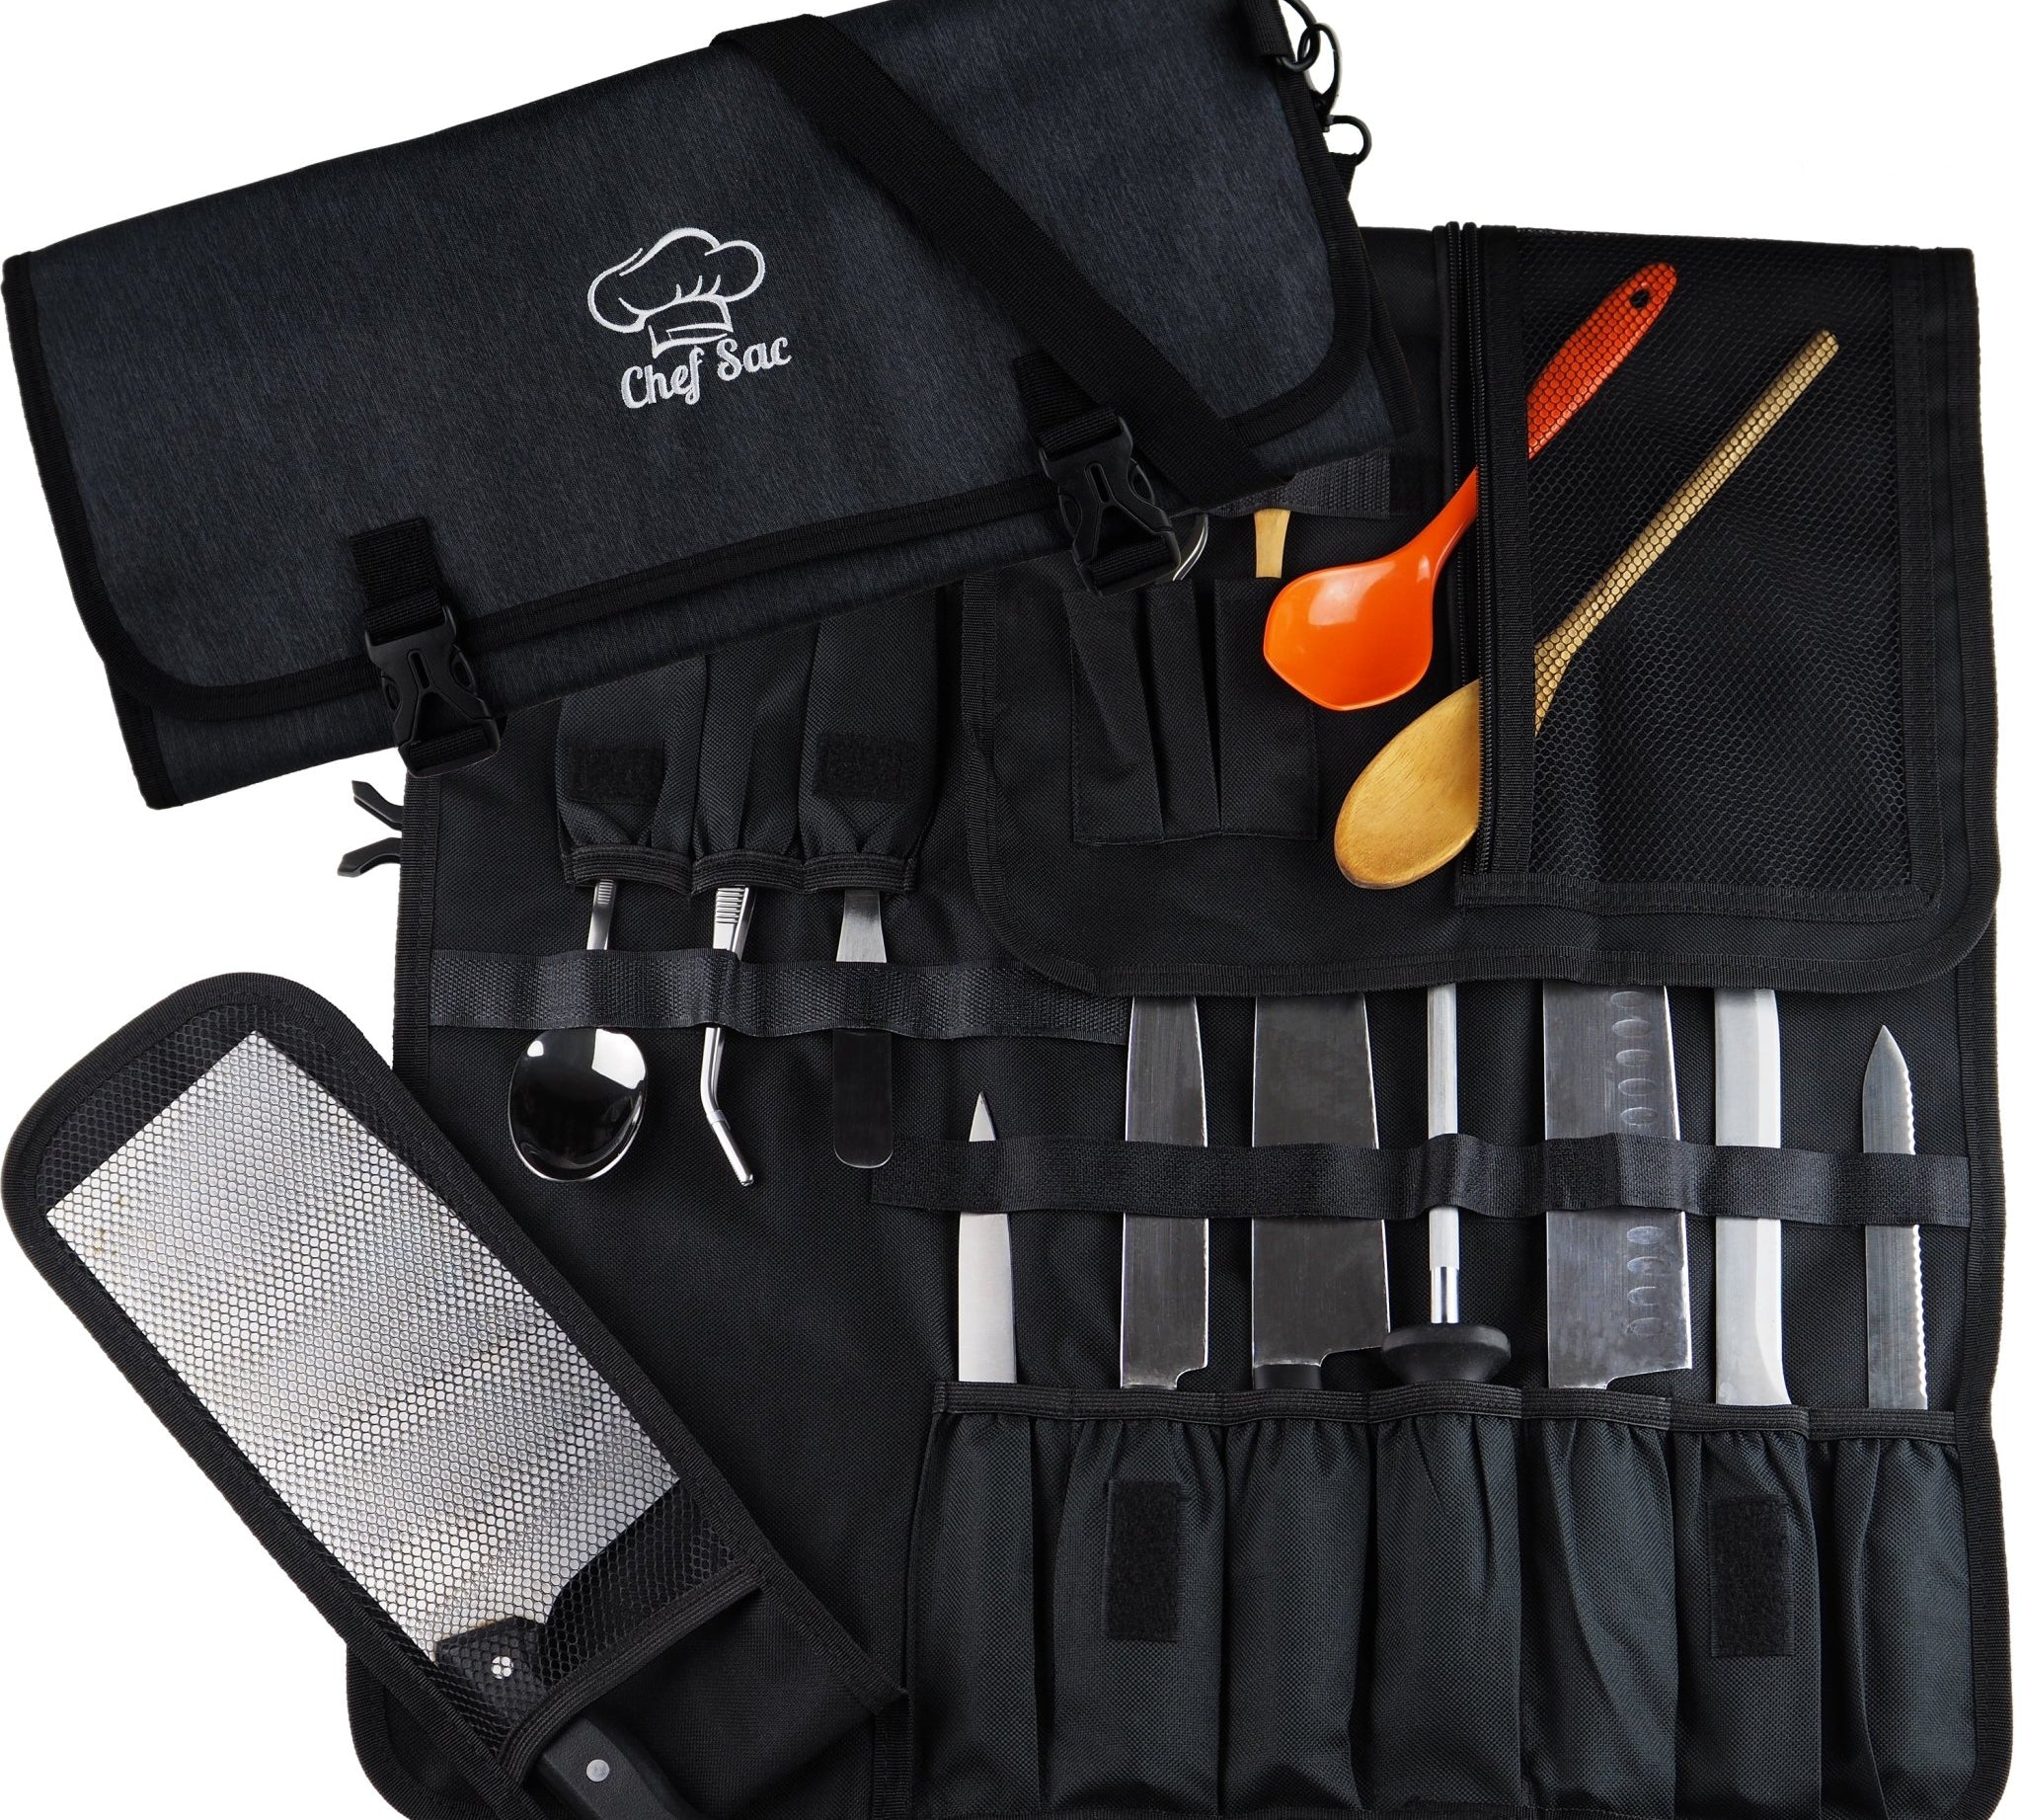 Types of Chef Knife Bags - How to Choose!? | Chef Sac